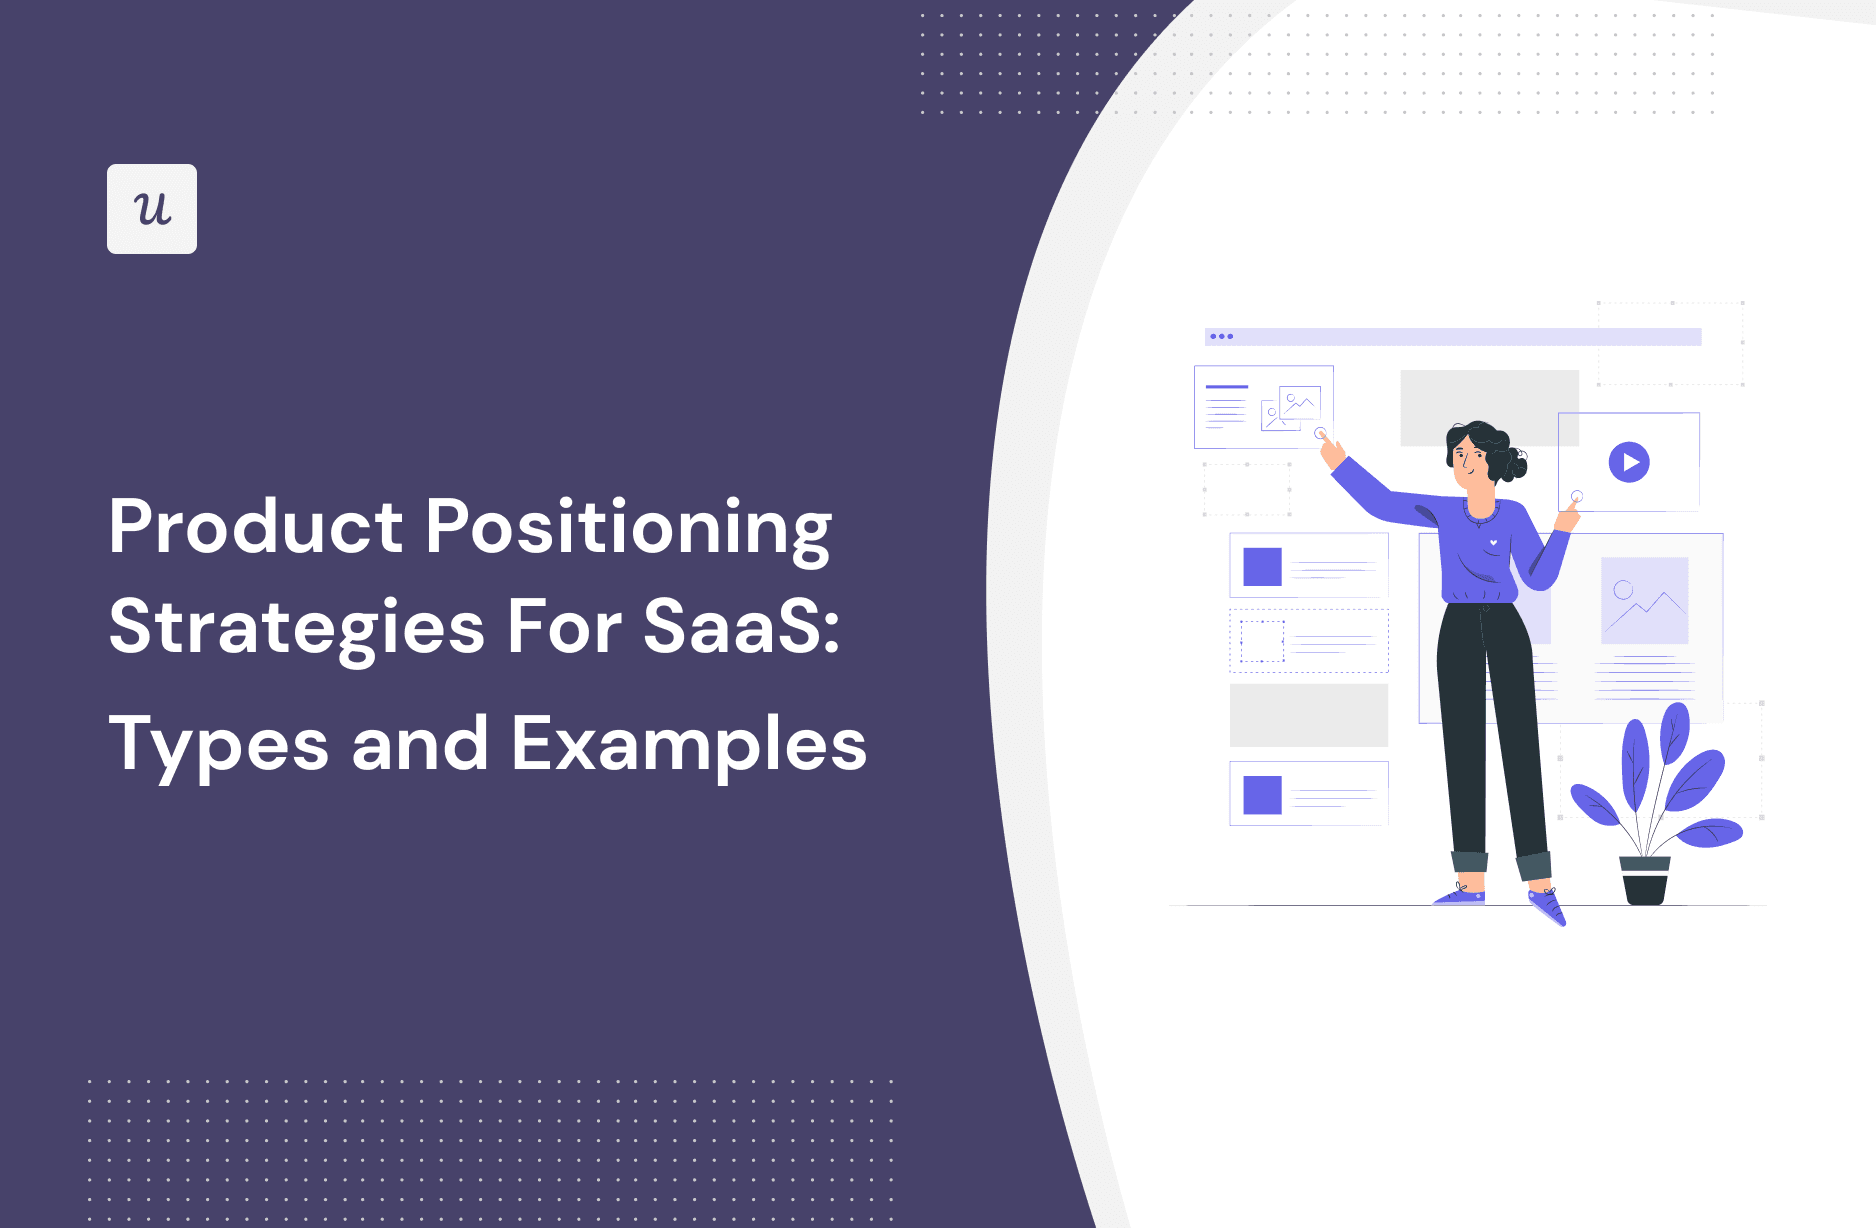 Product Positioning Strategies For SaaS: Types and Examples cover